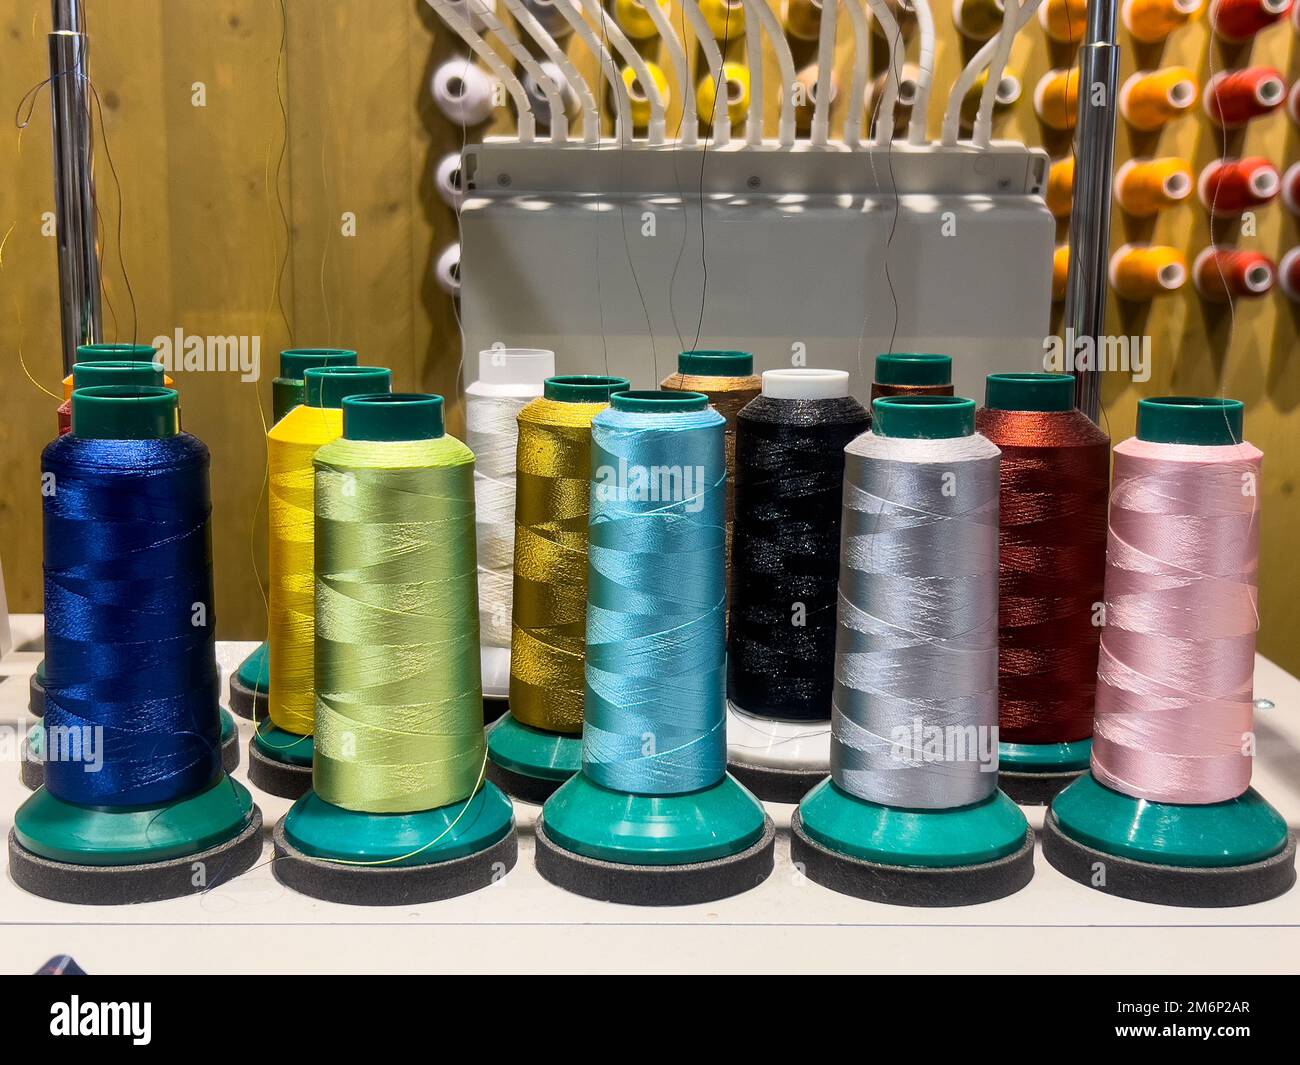 Sewing colourful threads display inside a Muji retail store. Stock Photo